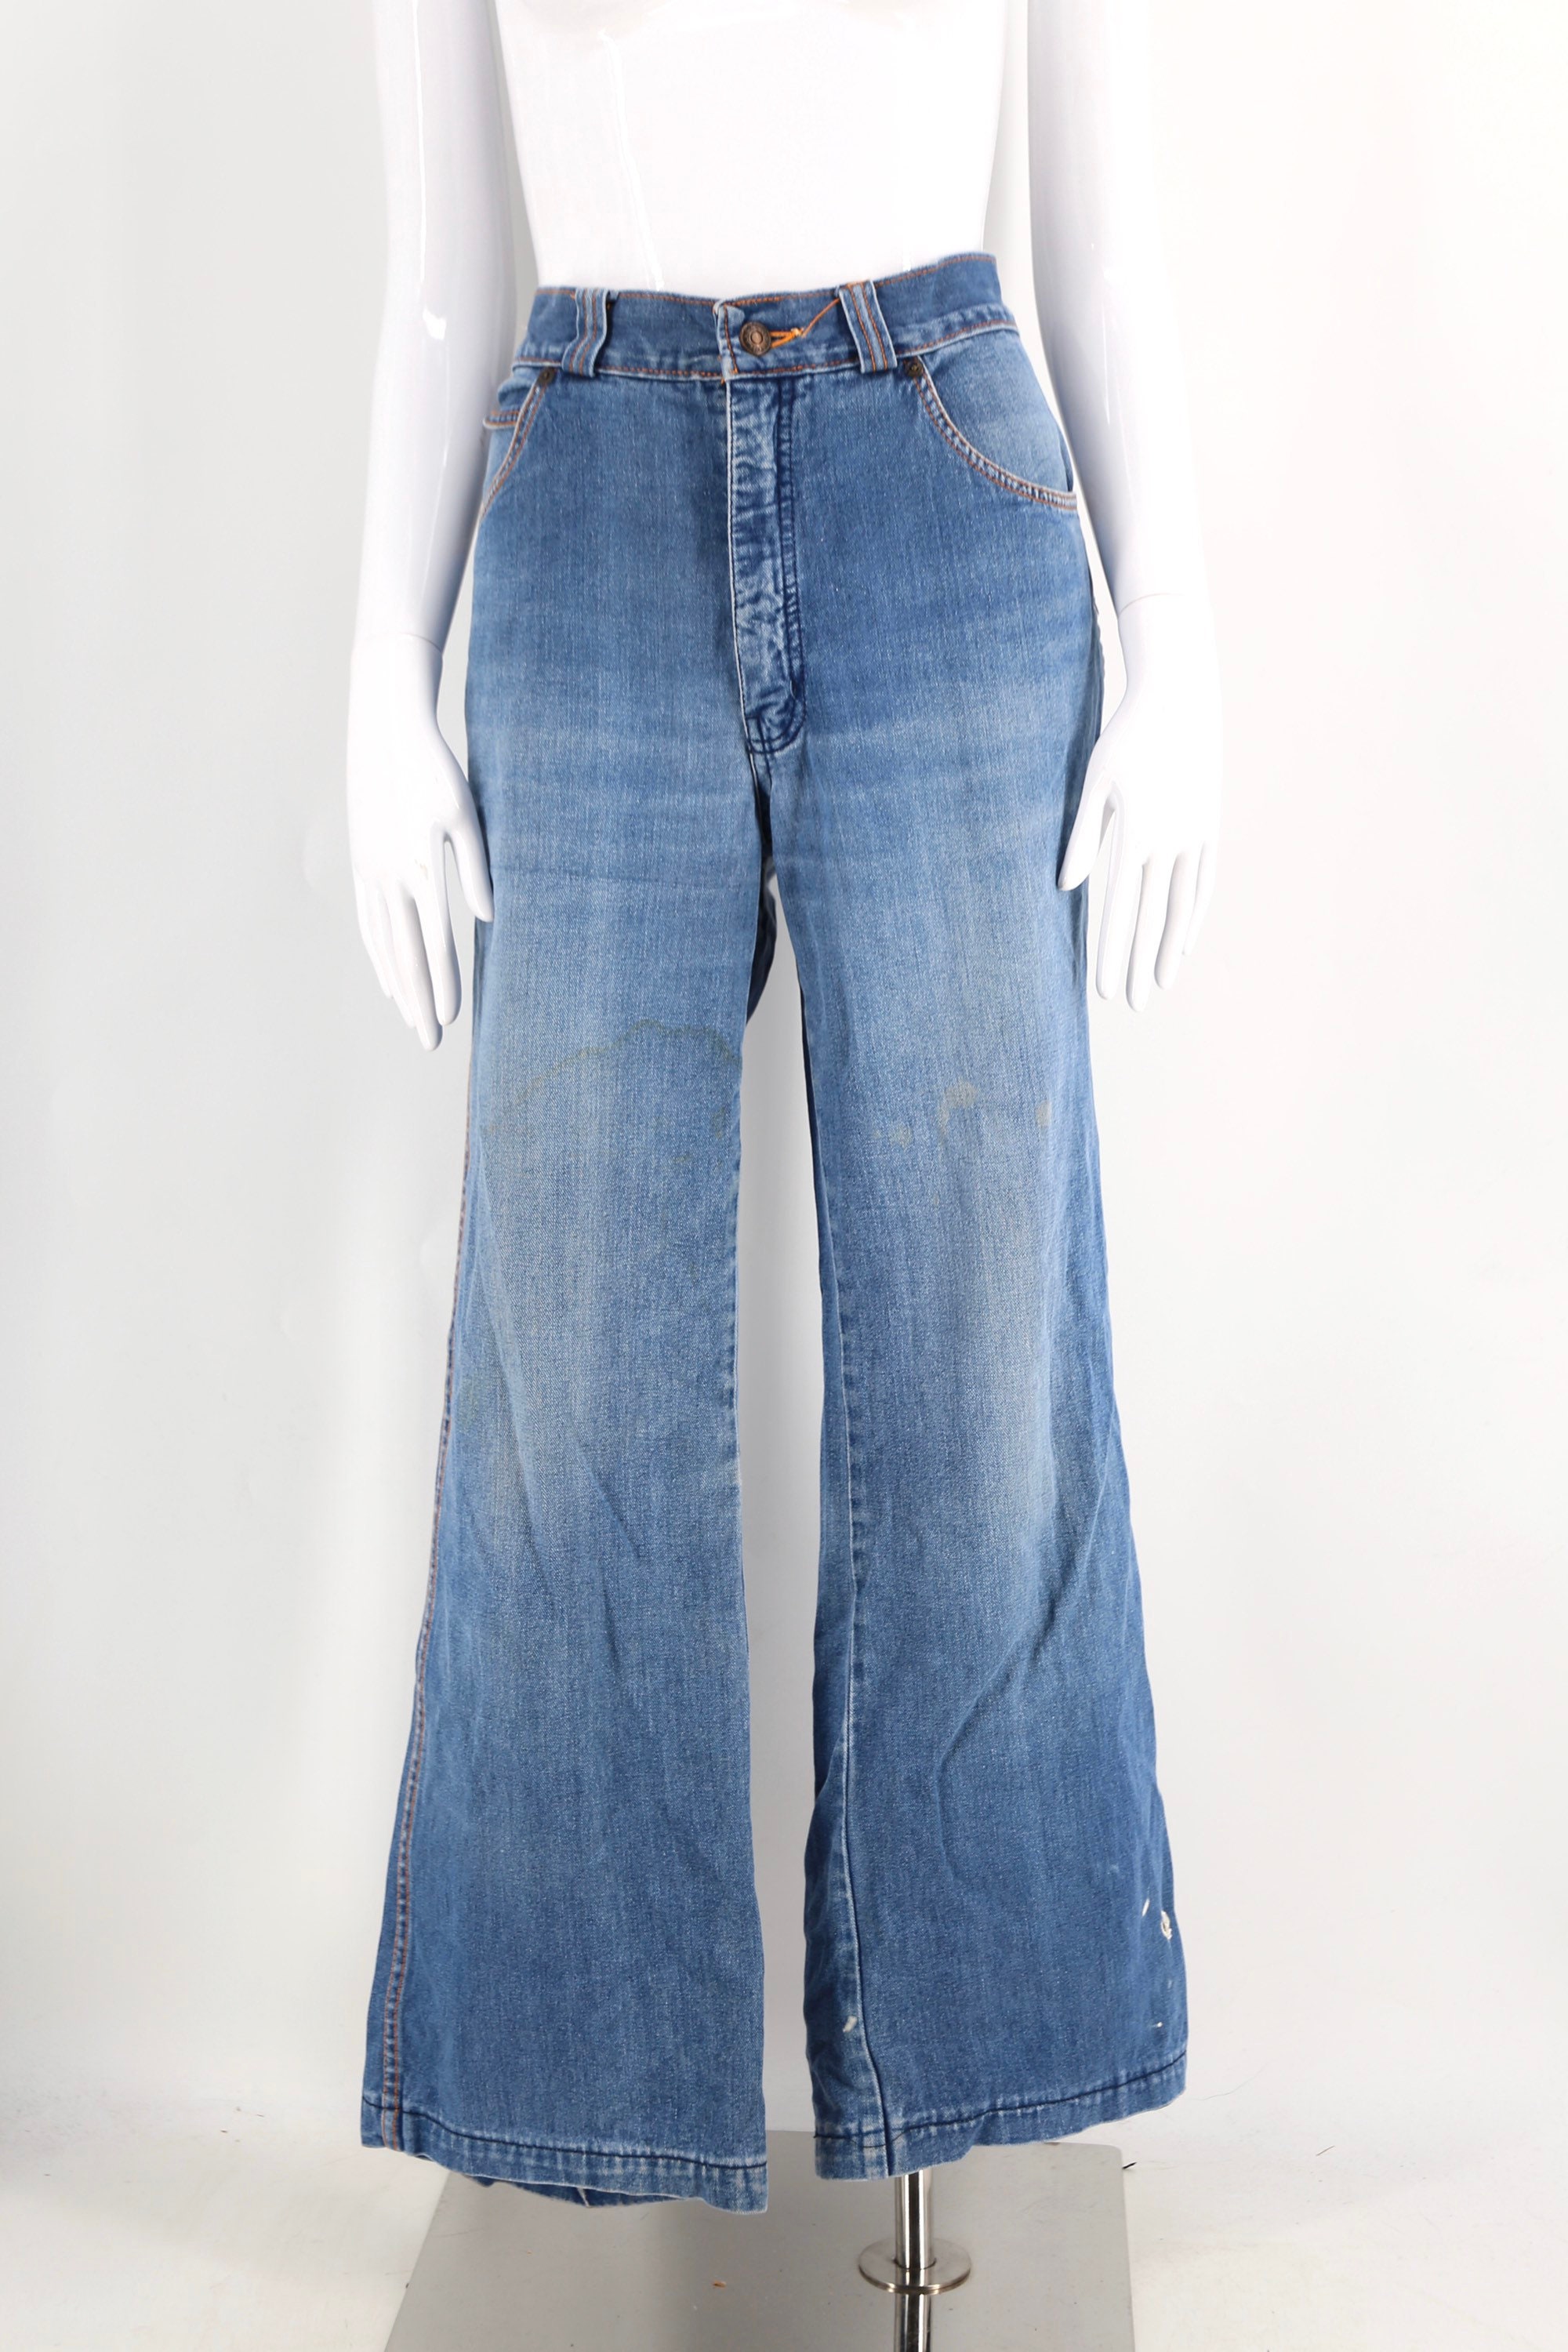 70s DISCO JEANS soft and light loose fit vintage jeans workwear pants ...